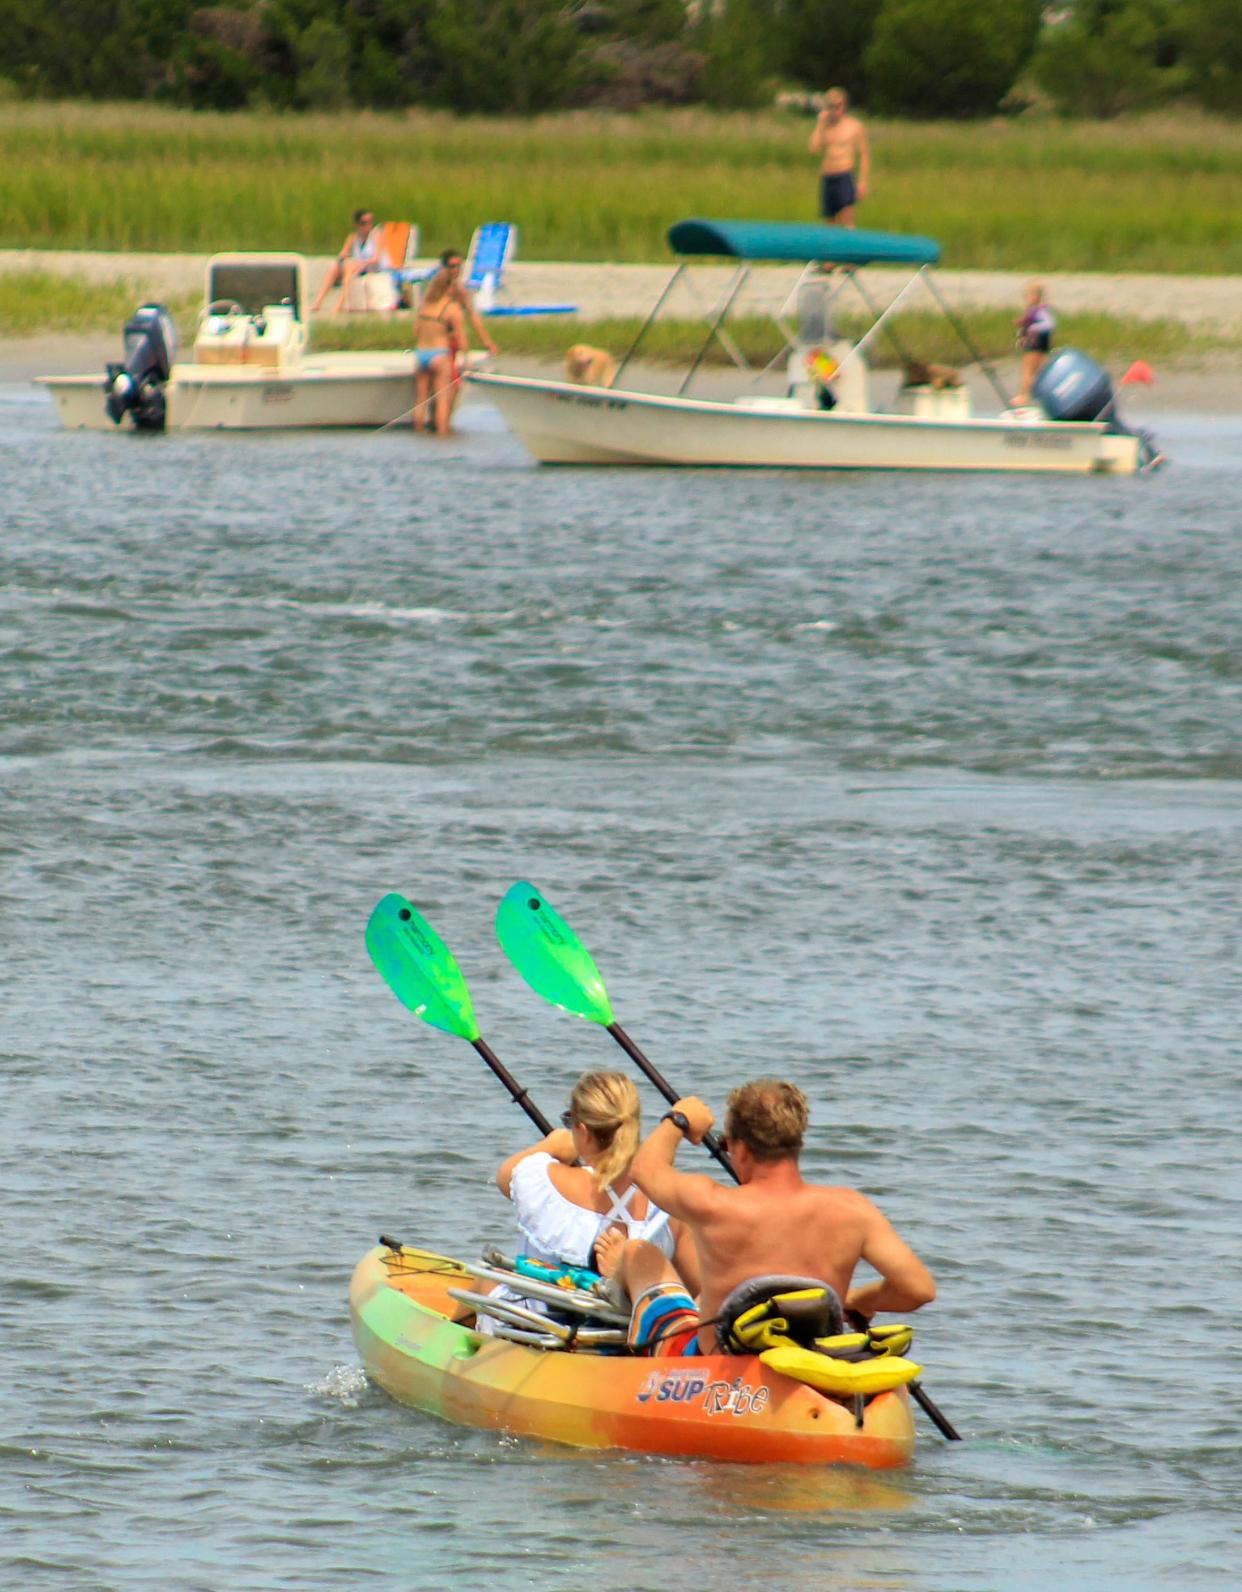 Kayakers paddle along Banks Channel at Wrightsville Beach, N.C. Saturday August 31, 2019, over Labor Day weekend as they enjoy the last official beach weekend of the season.